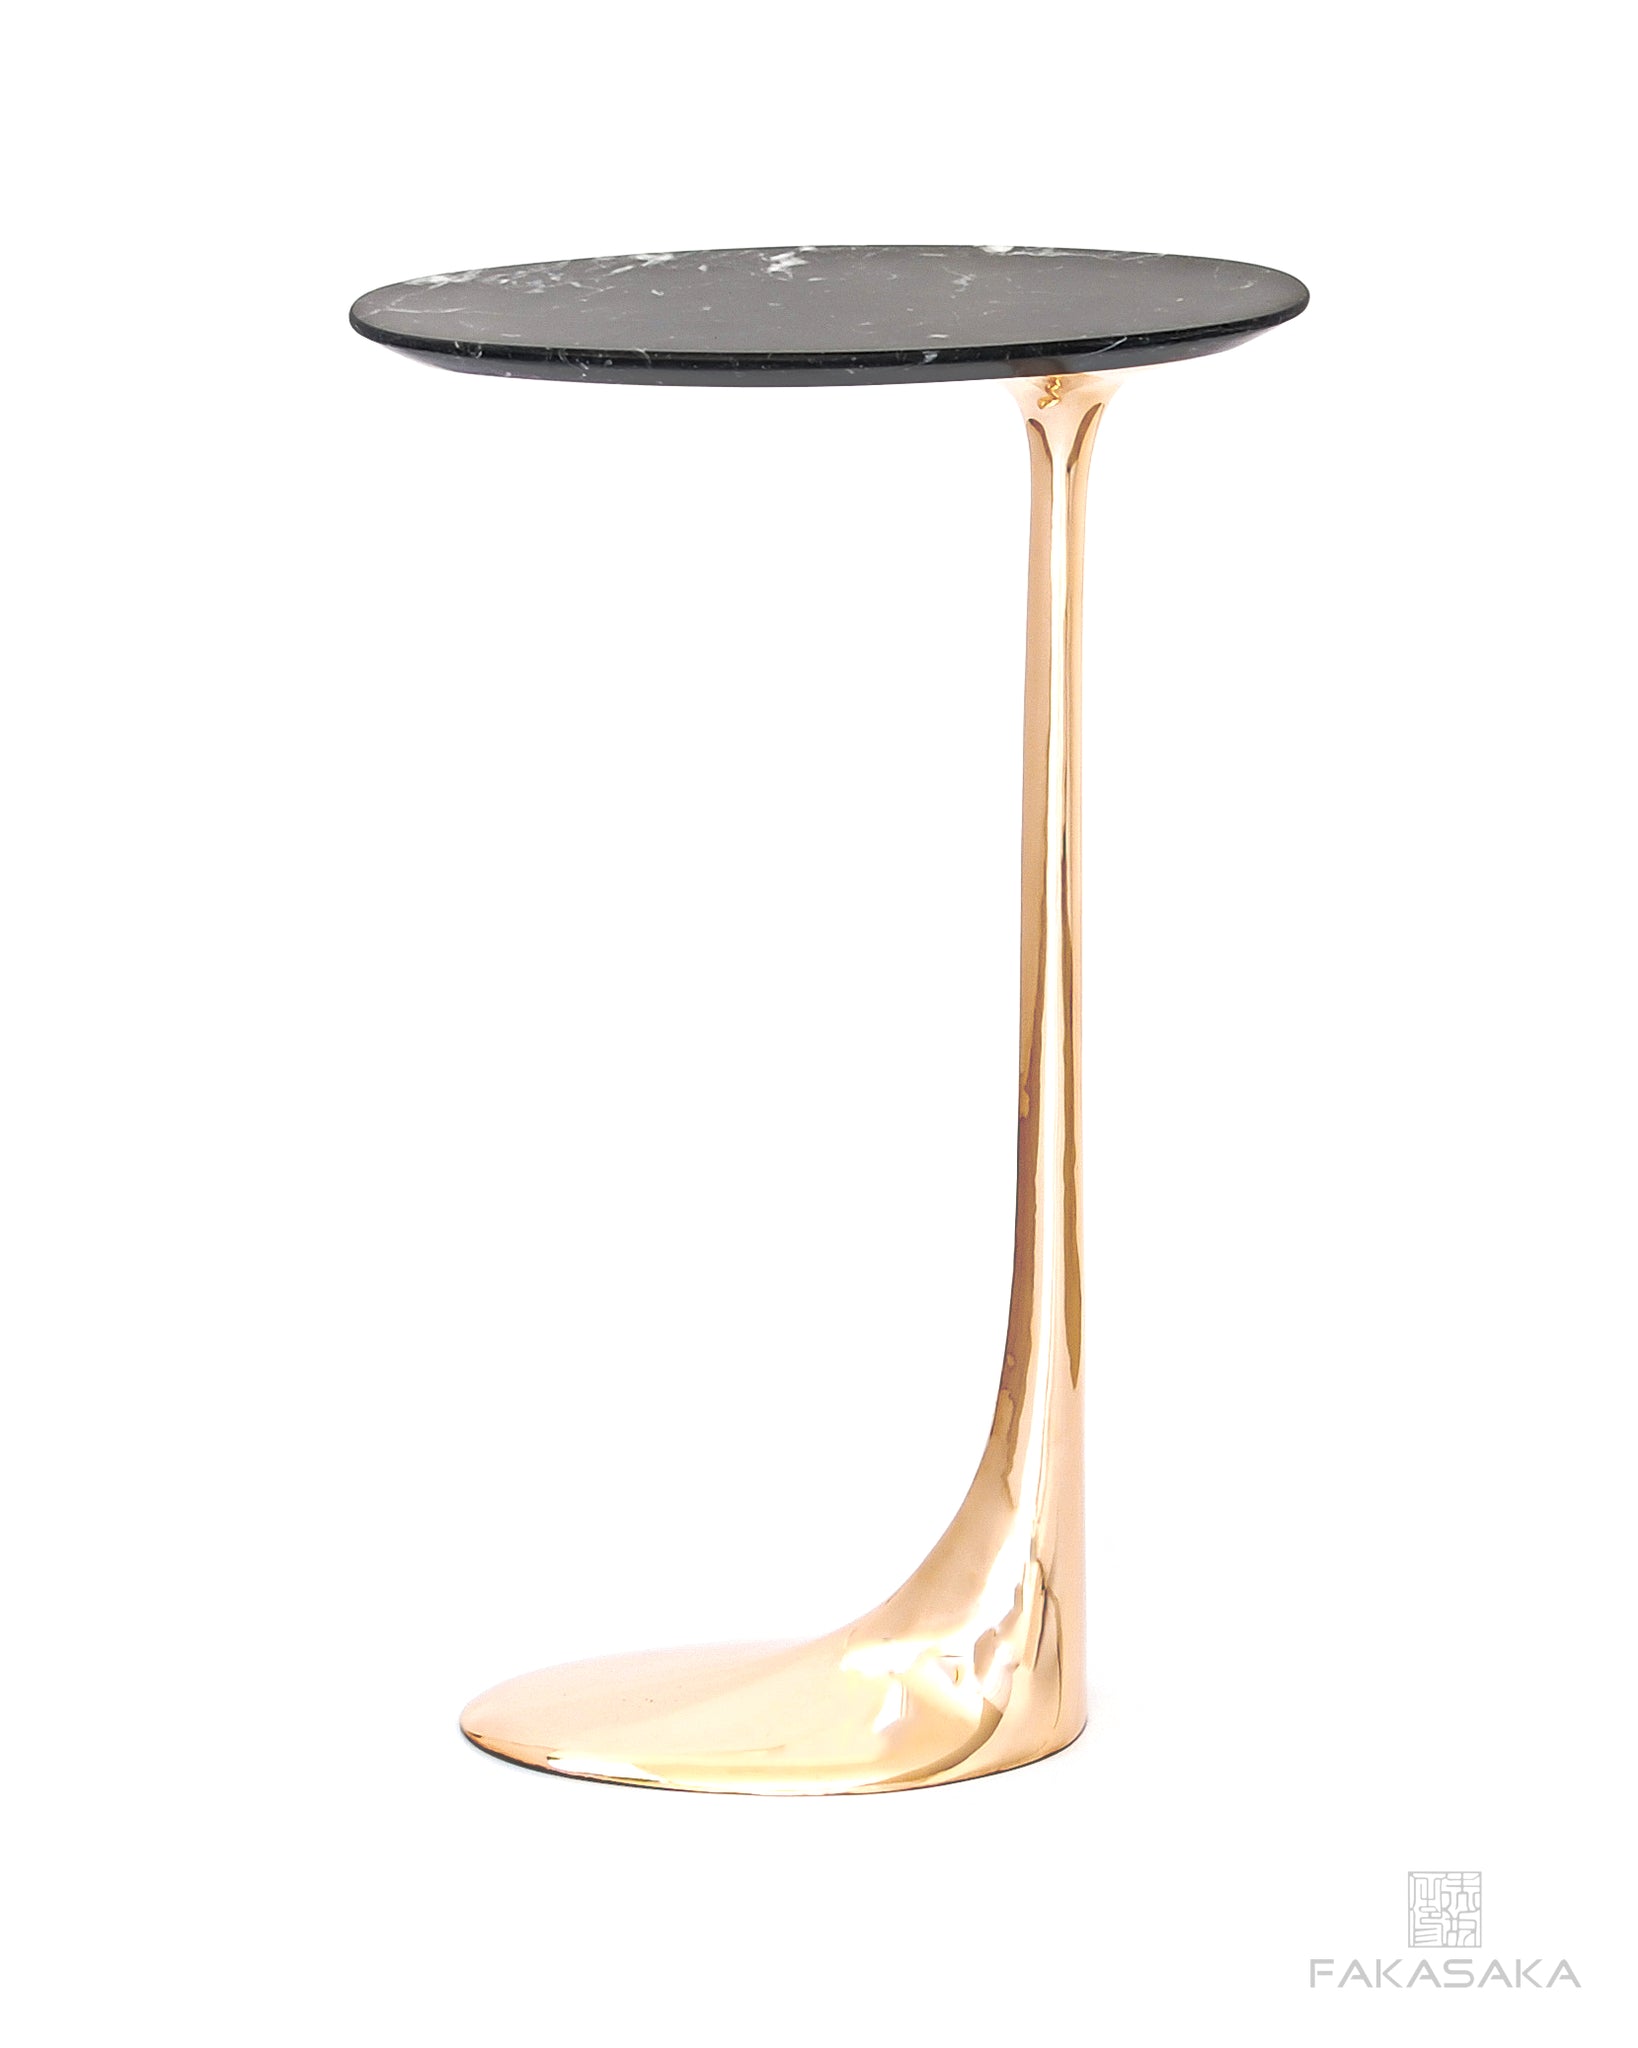 JAGGER DRINK TABLE<br><br>NERO MARQUINA MARBLE<br>POLISHED BRONZE